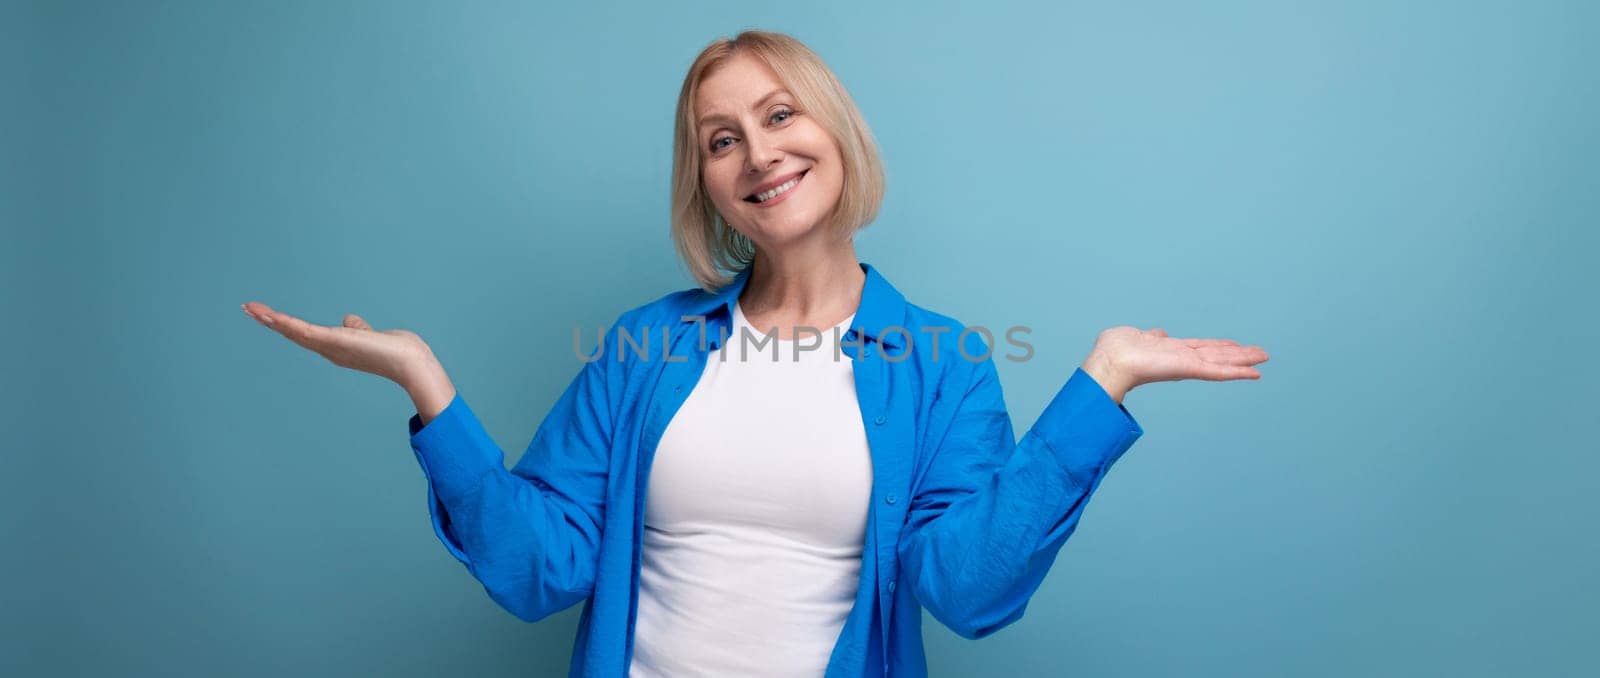 blond mature woman with pleasant smile on studio background by TRMK